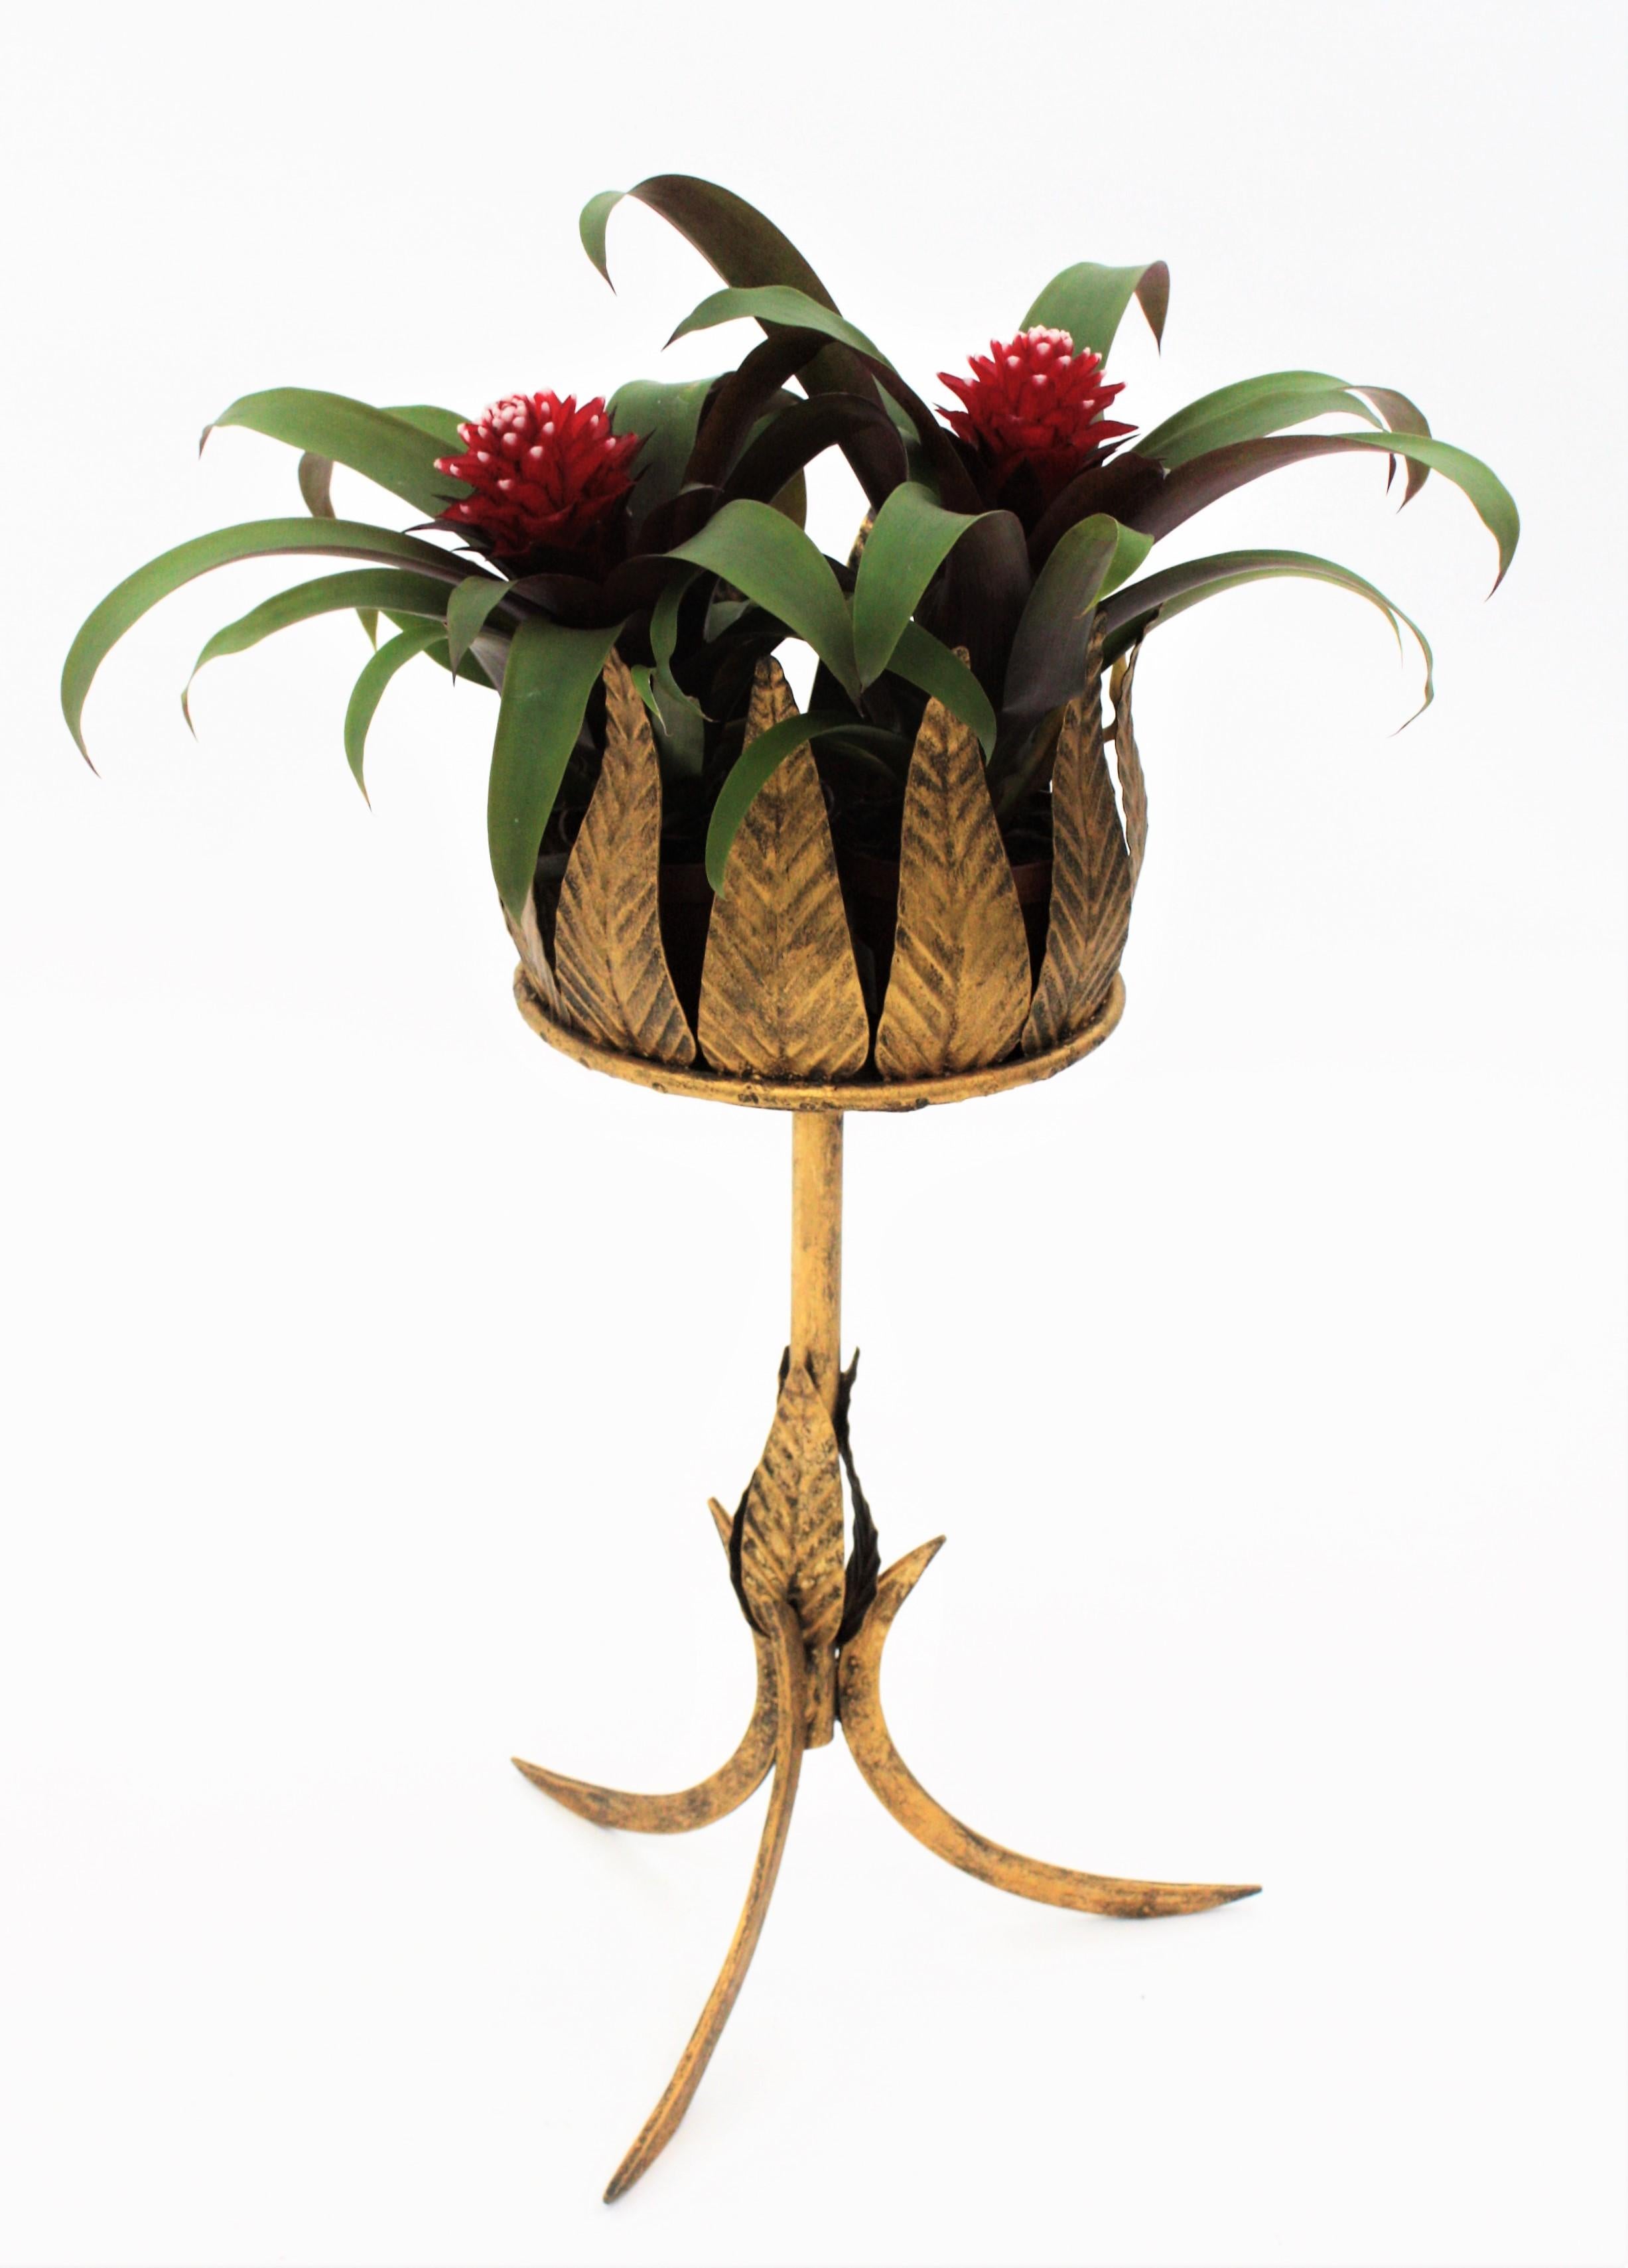 Iron Gilt Metal Leafed Drinks Stand or Planter on a Tripod Base, Spain, 1950s